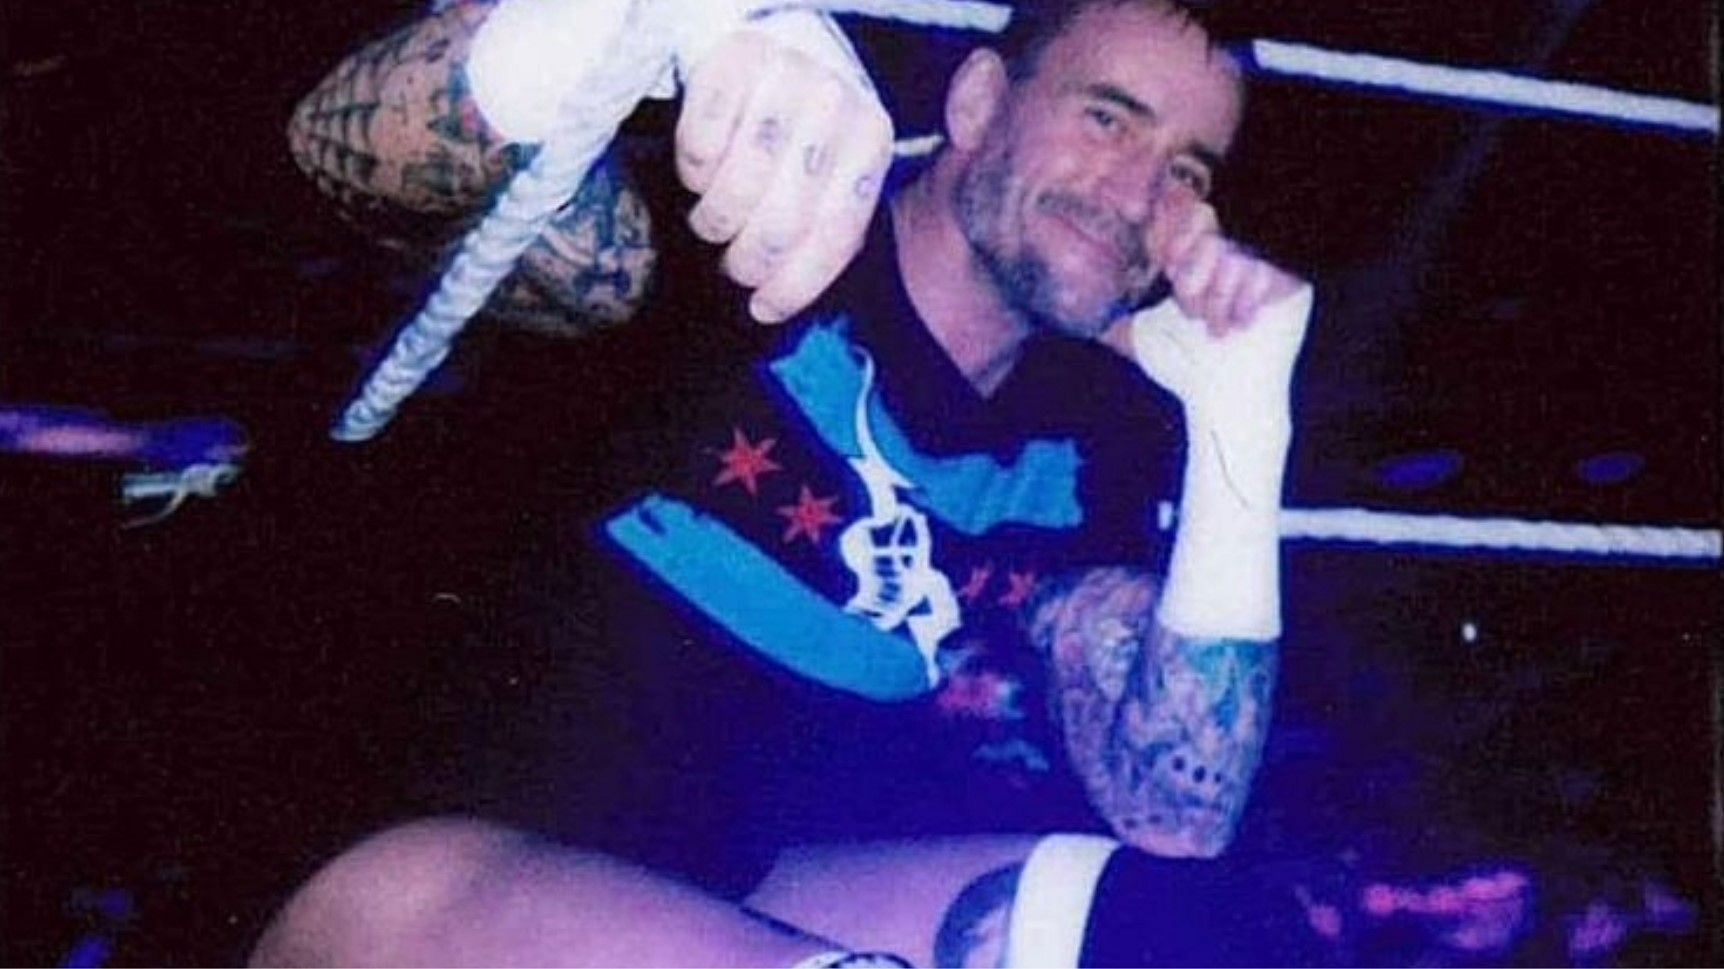 CM Punk seems to be enjoying his time off